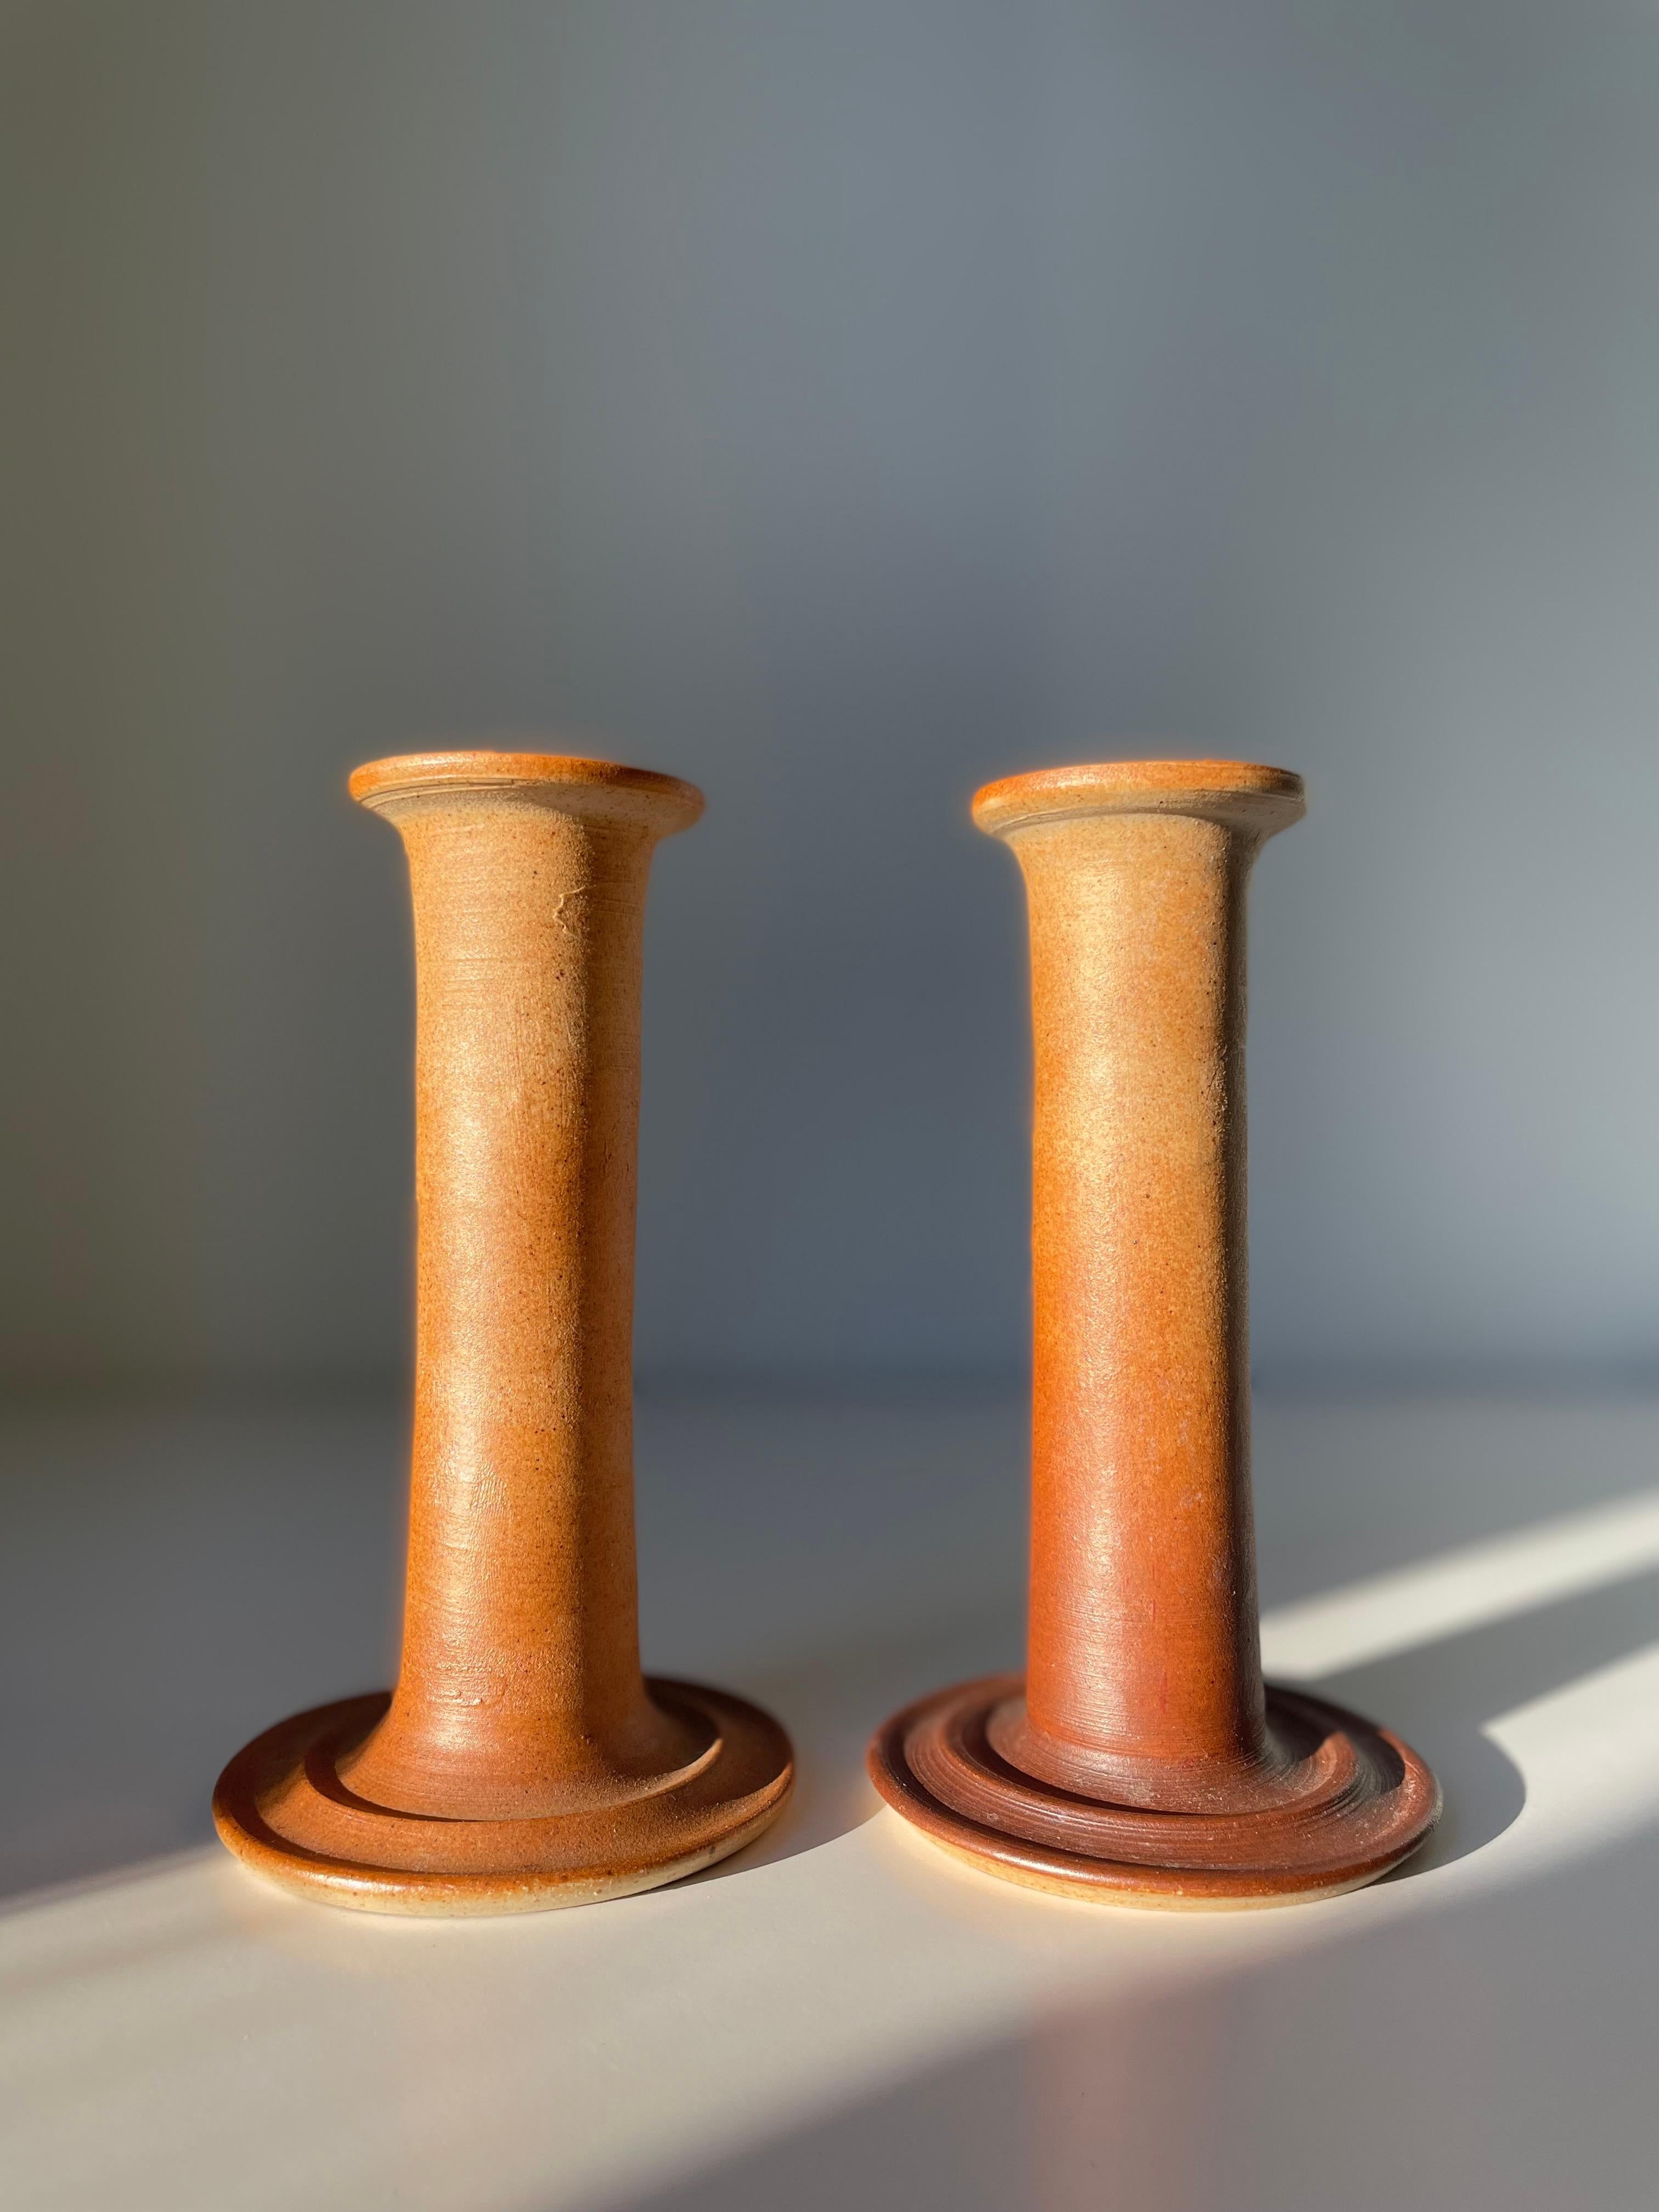 Pair of J. Packness Tawny Ceramic Candle Sticks, 1970s For Sale 3